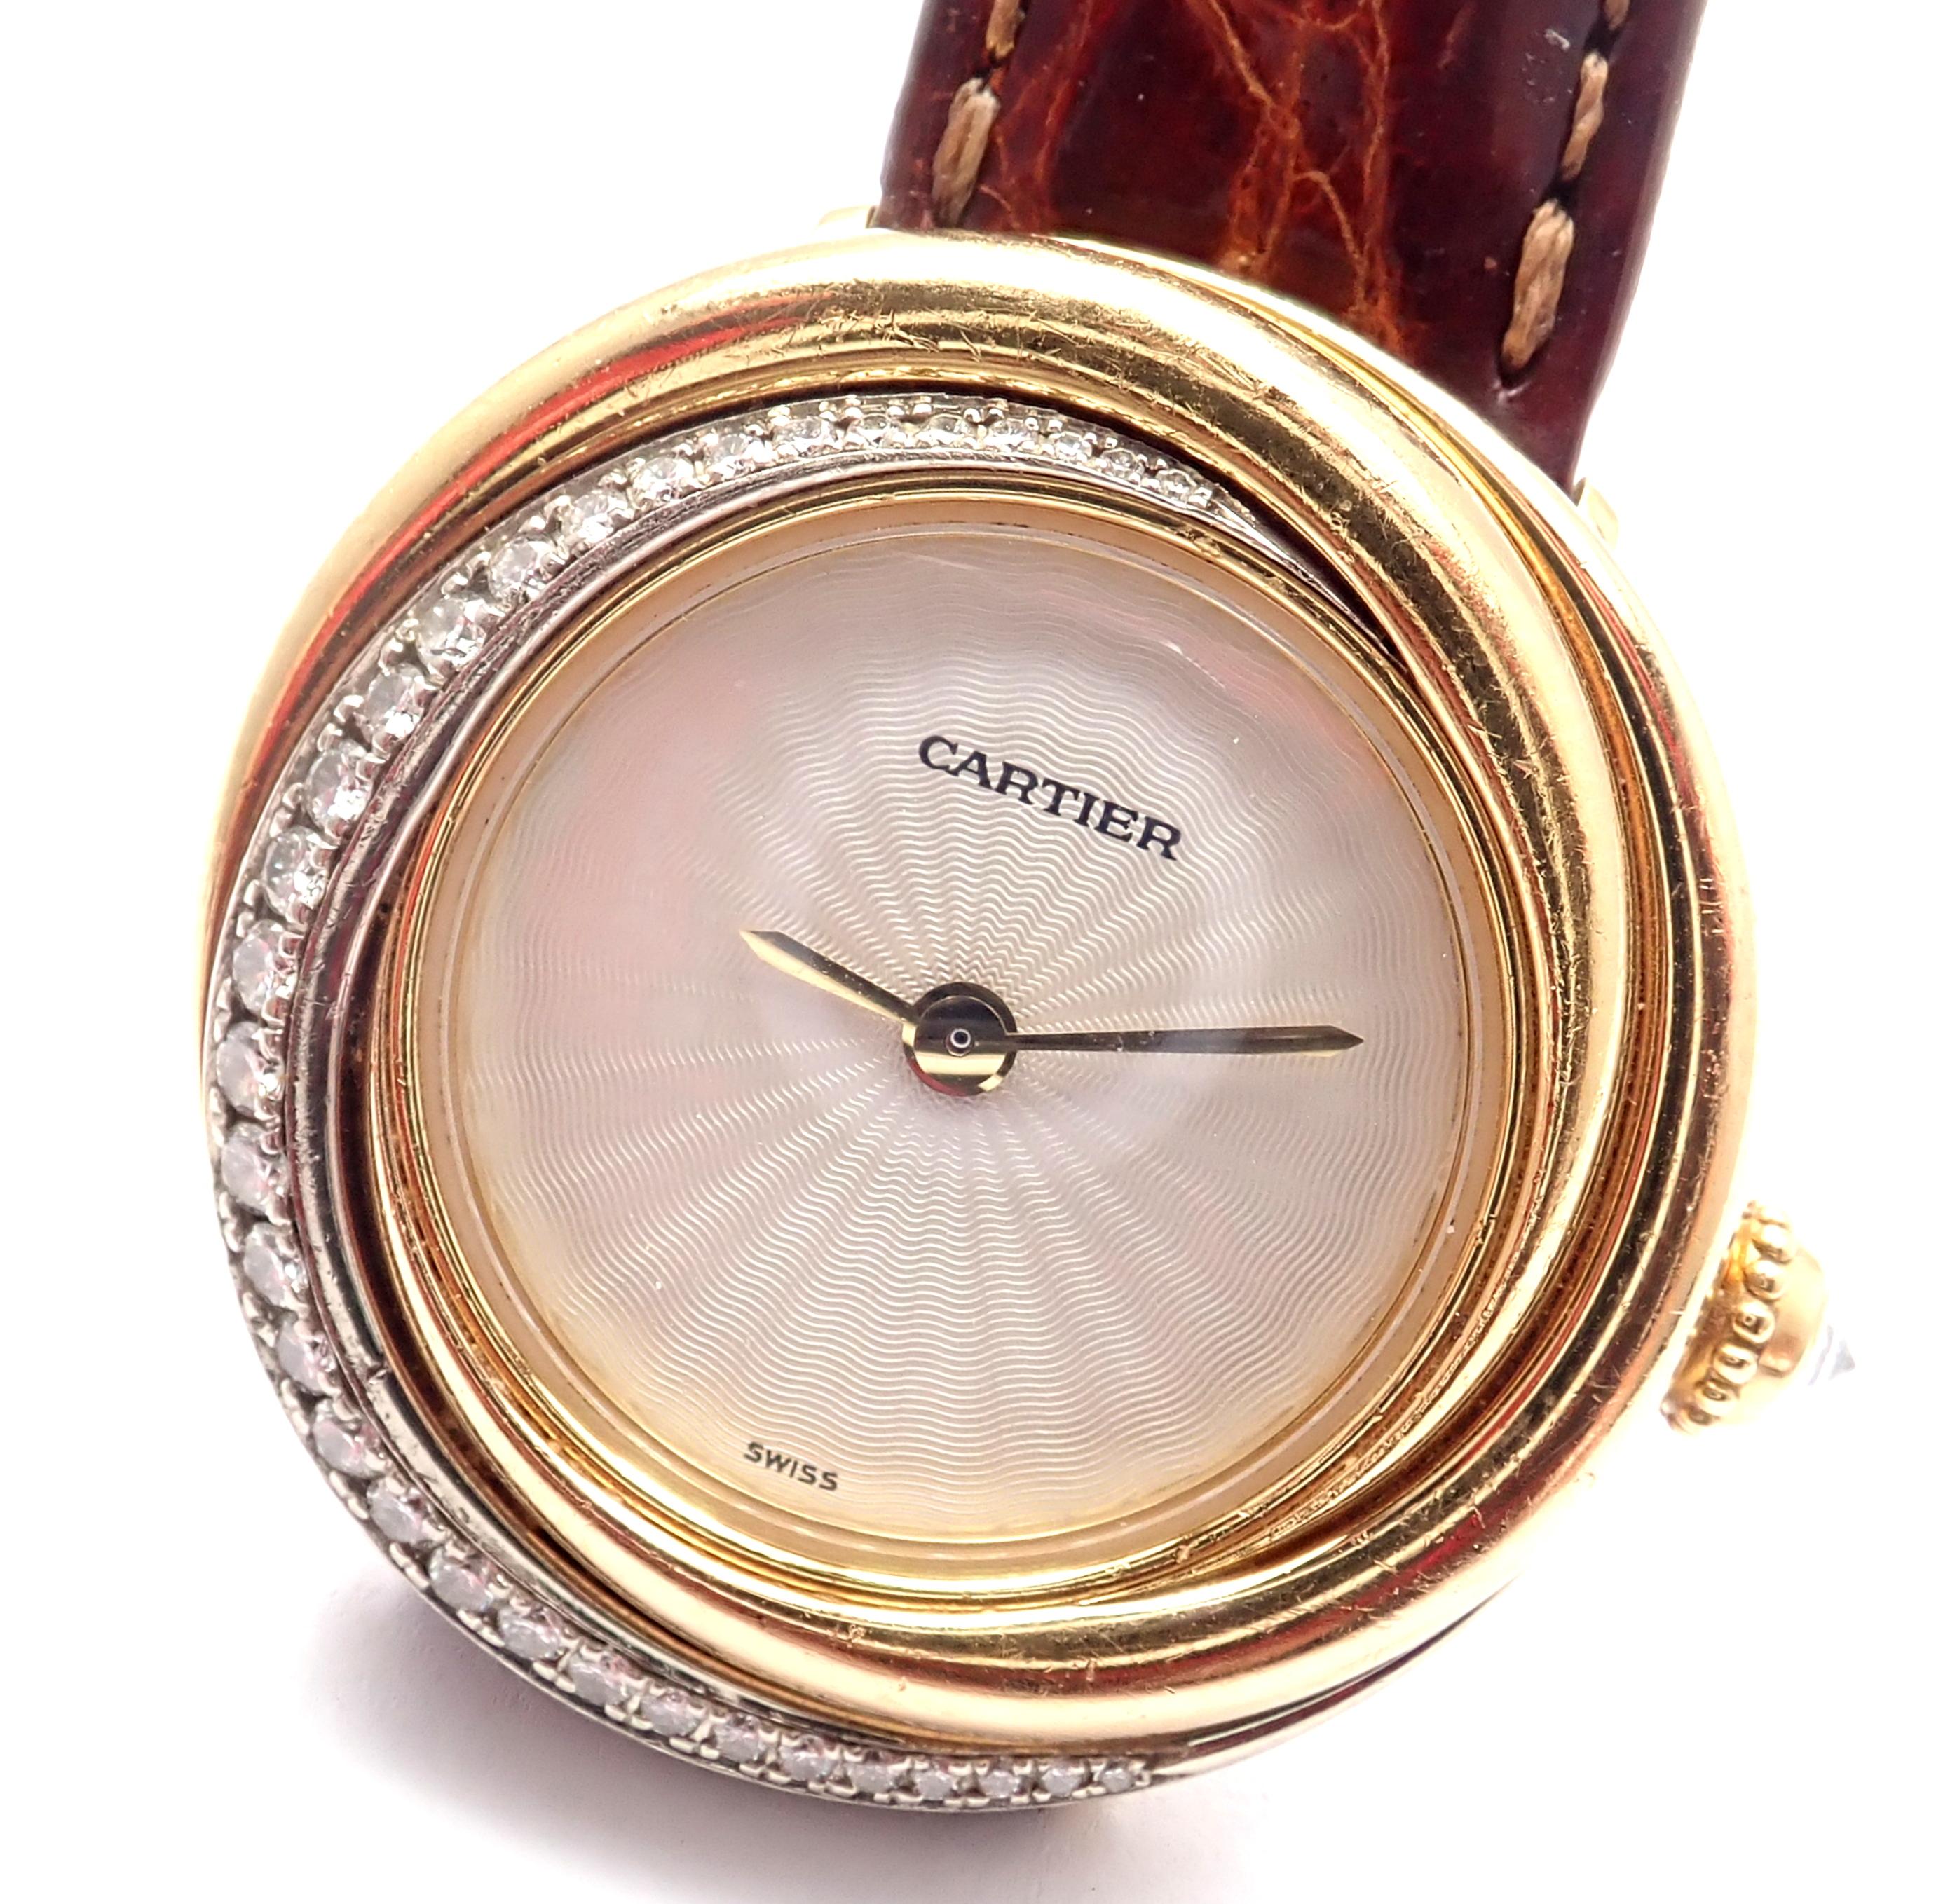 18k Tri-Color Gold Diamond Trinity Wristwatch by Cartier. 
With Round brilliant cut diamonds VVS1 clarity, E color.
Style Name: Trinity
Reference Number: 2357
Case Material: 18k Tri-Color Gold with Diamonds
Dial Color: Silvery-white guilloche